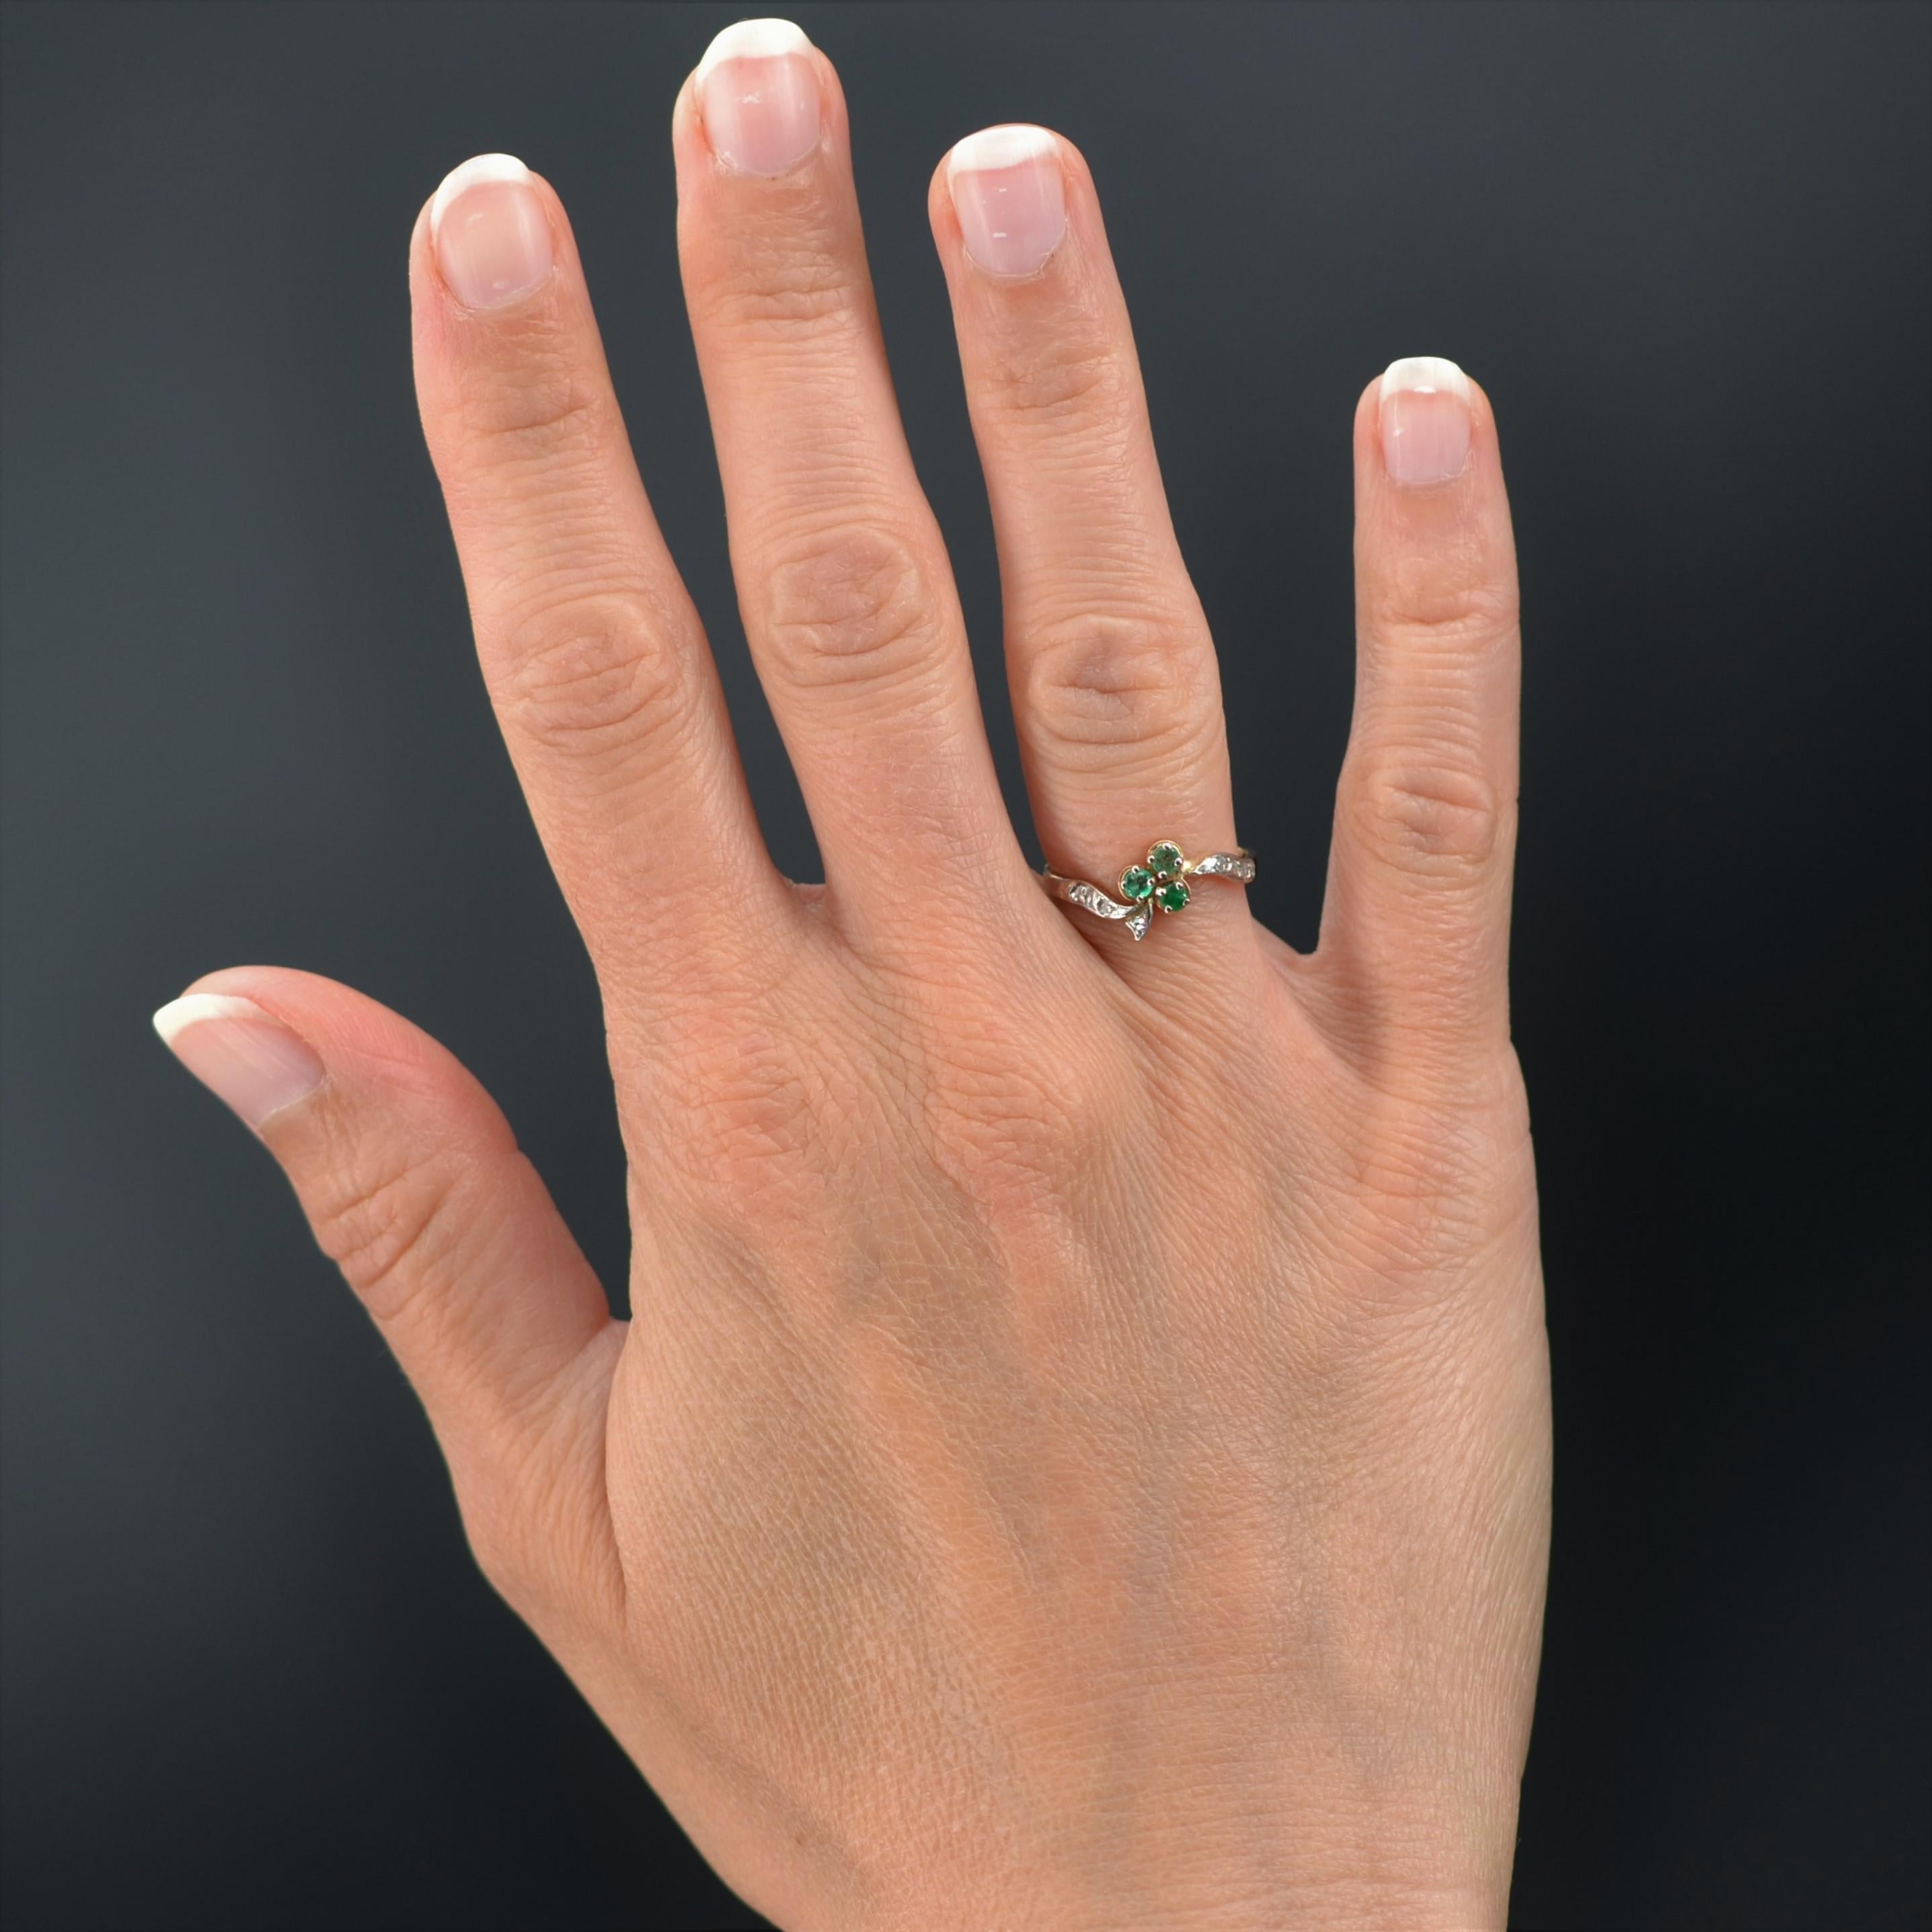 Ring in 18 karat yellow gold.
Charming antique ring, it is formed of a clover whose leaves are made of 3 round emeralds set with claws, and the tail of a small pattern adorned with a rose-cut diamond. On both sides, the start of the ring forms 2